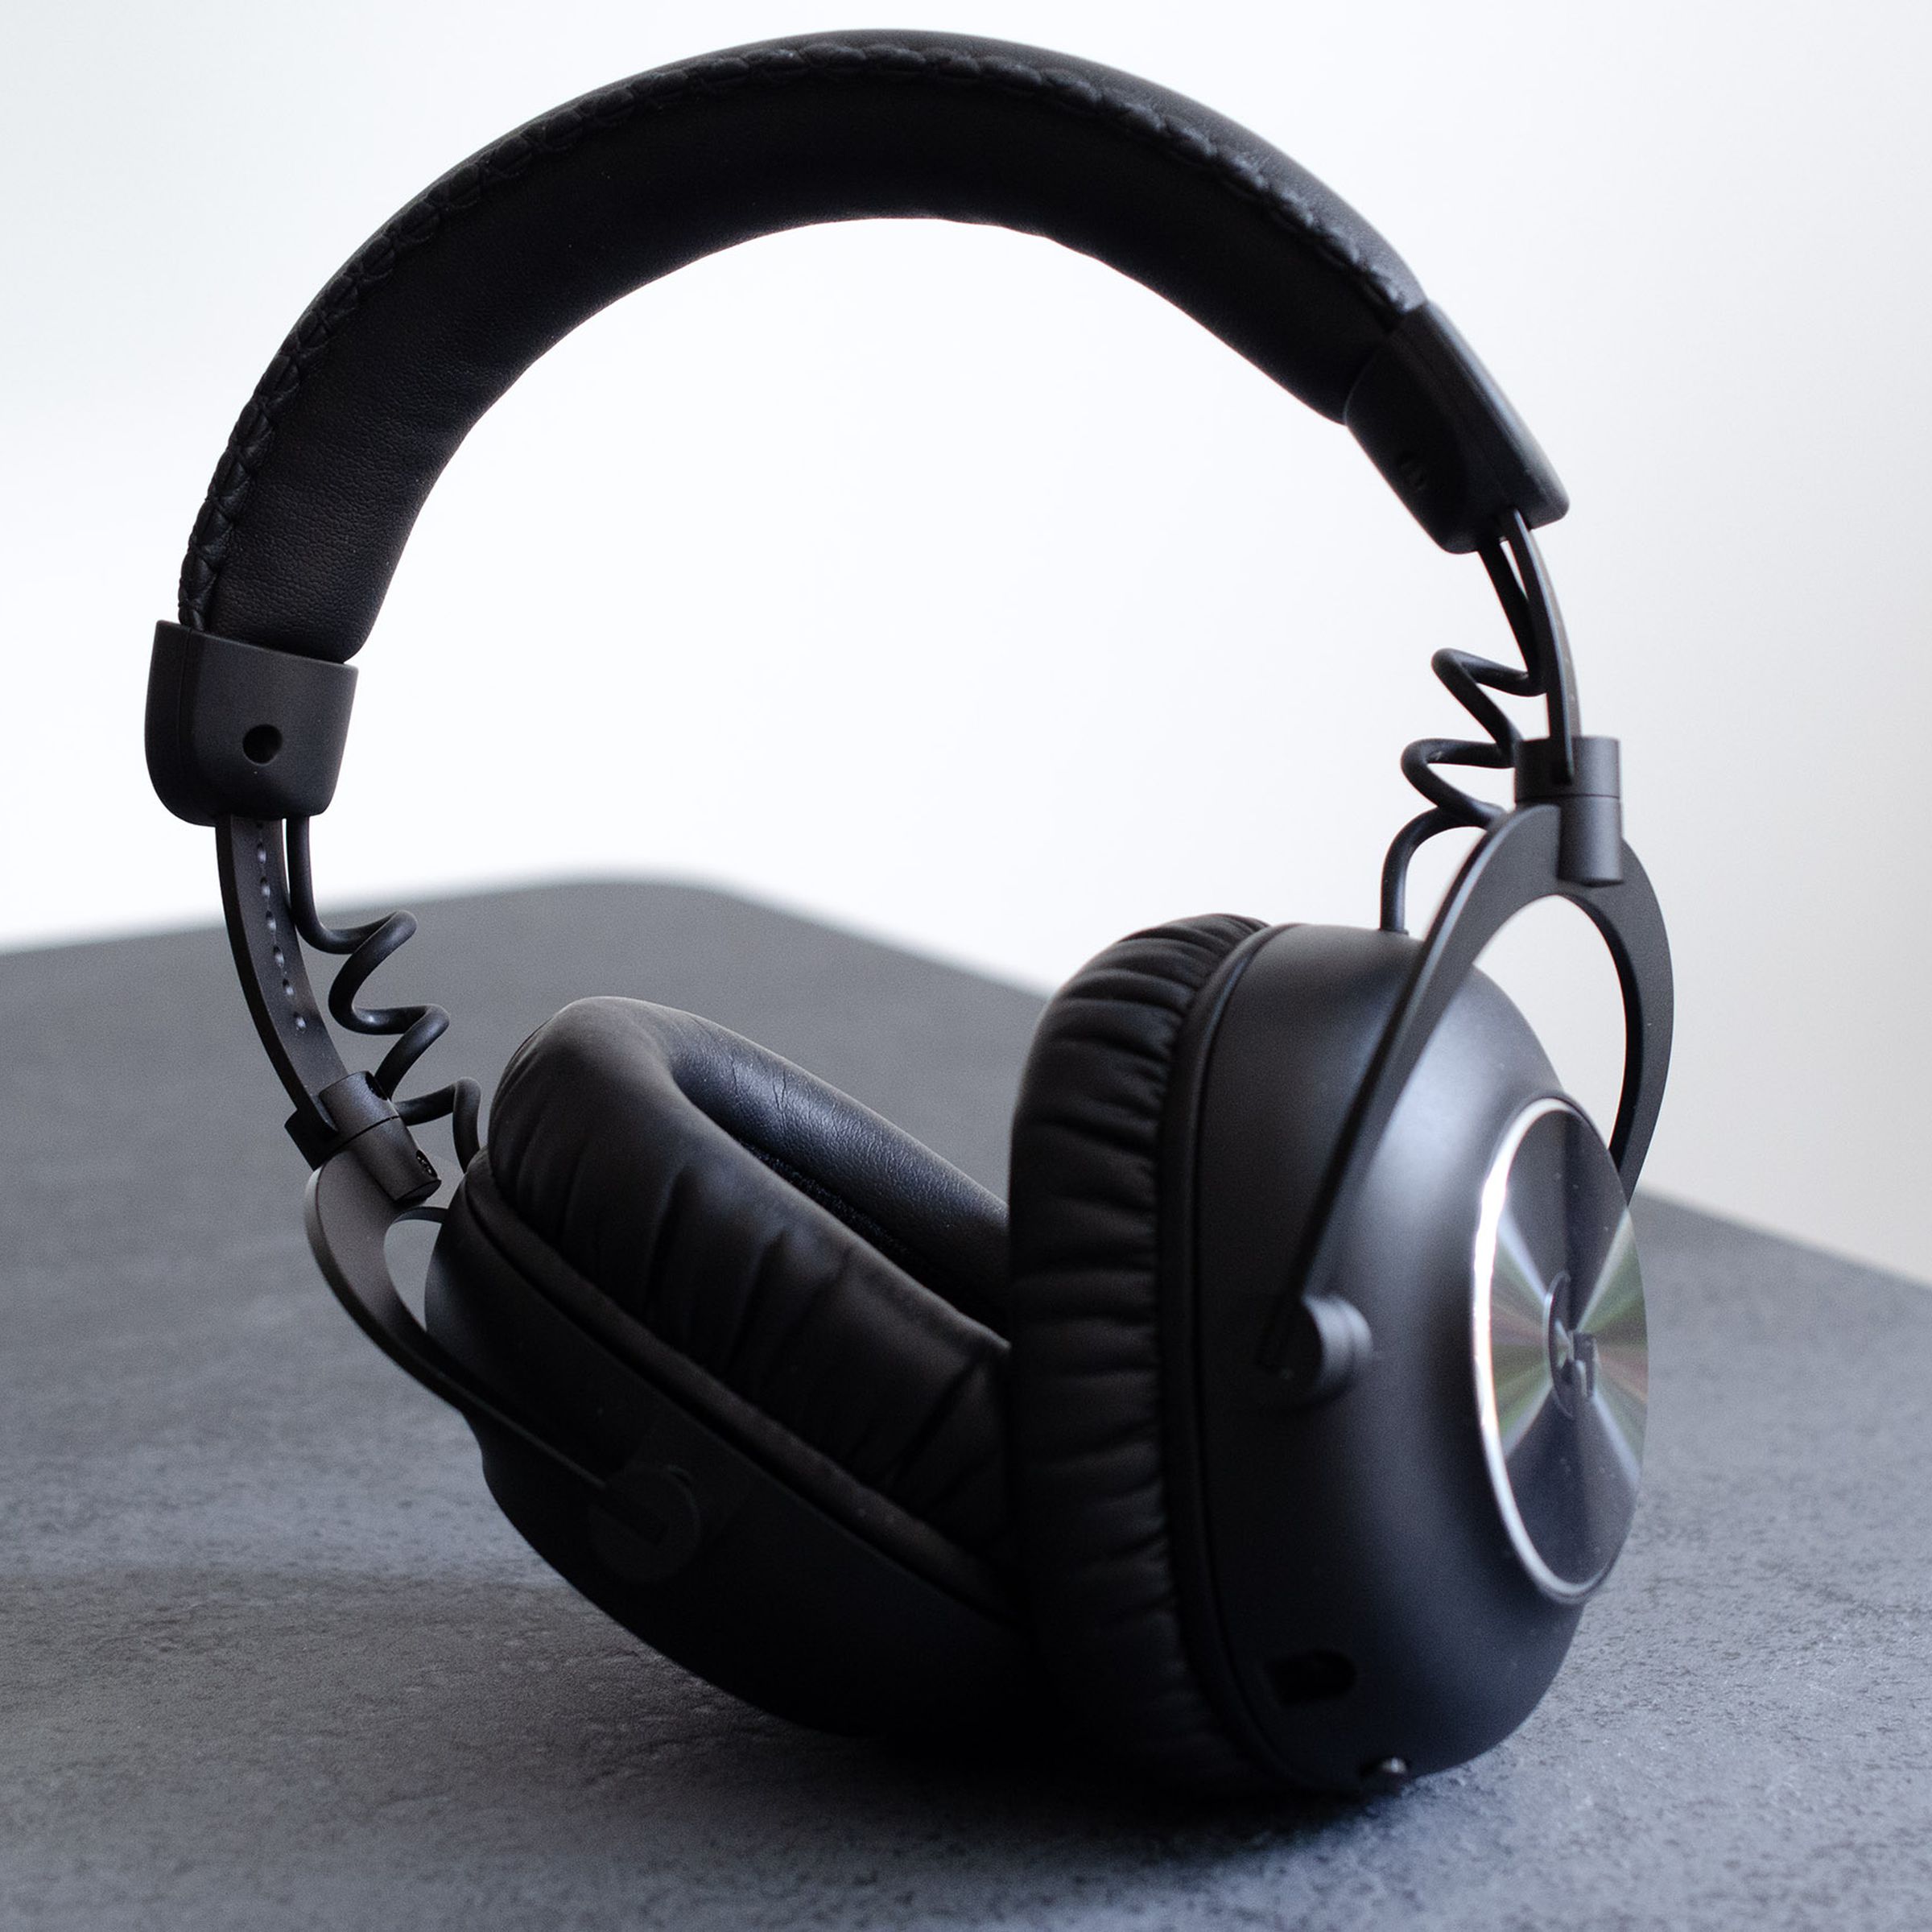 A photo of Logitech’s latest G Pro X 2 headset on a table